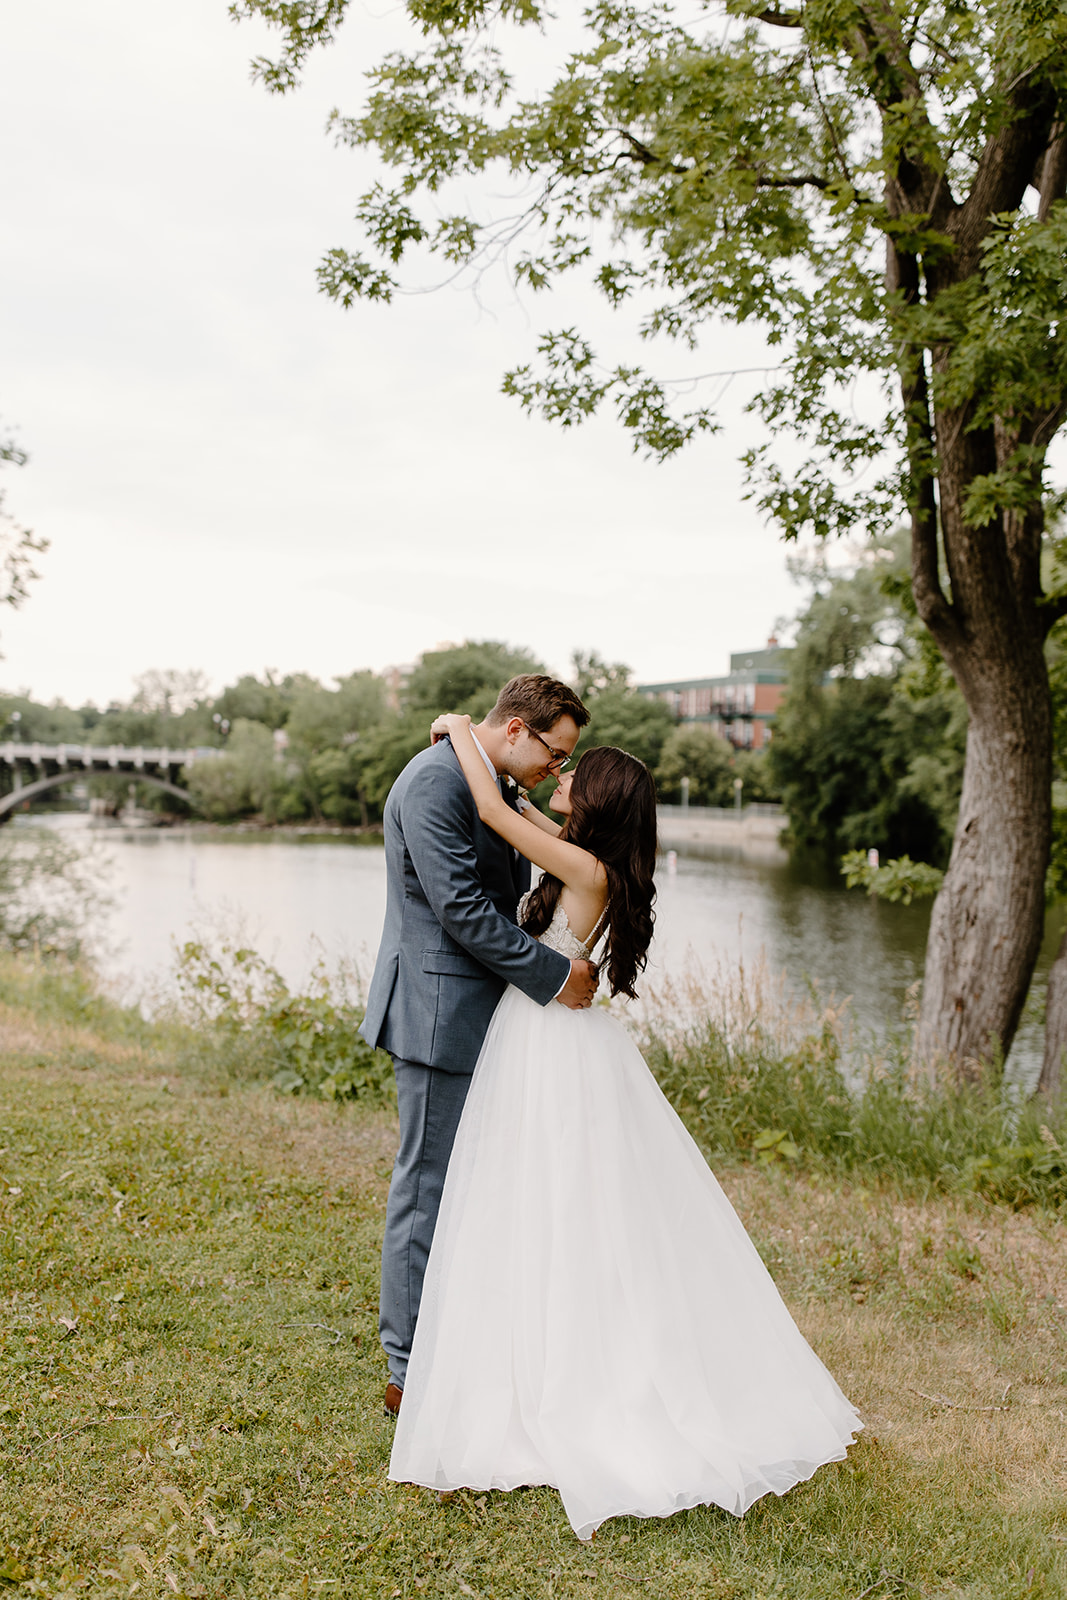 Bride has her arms around her groom's neck in front of a river